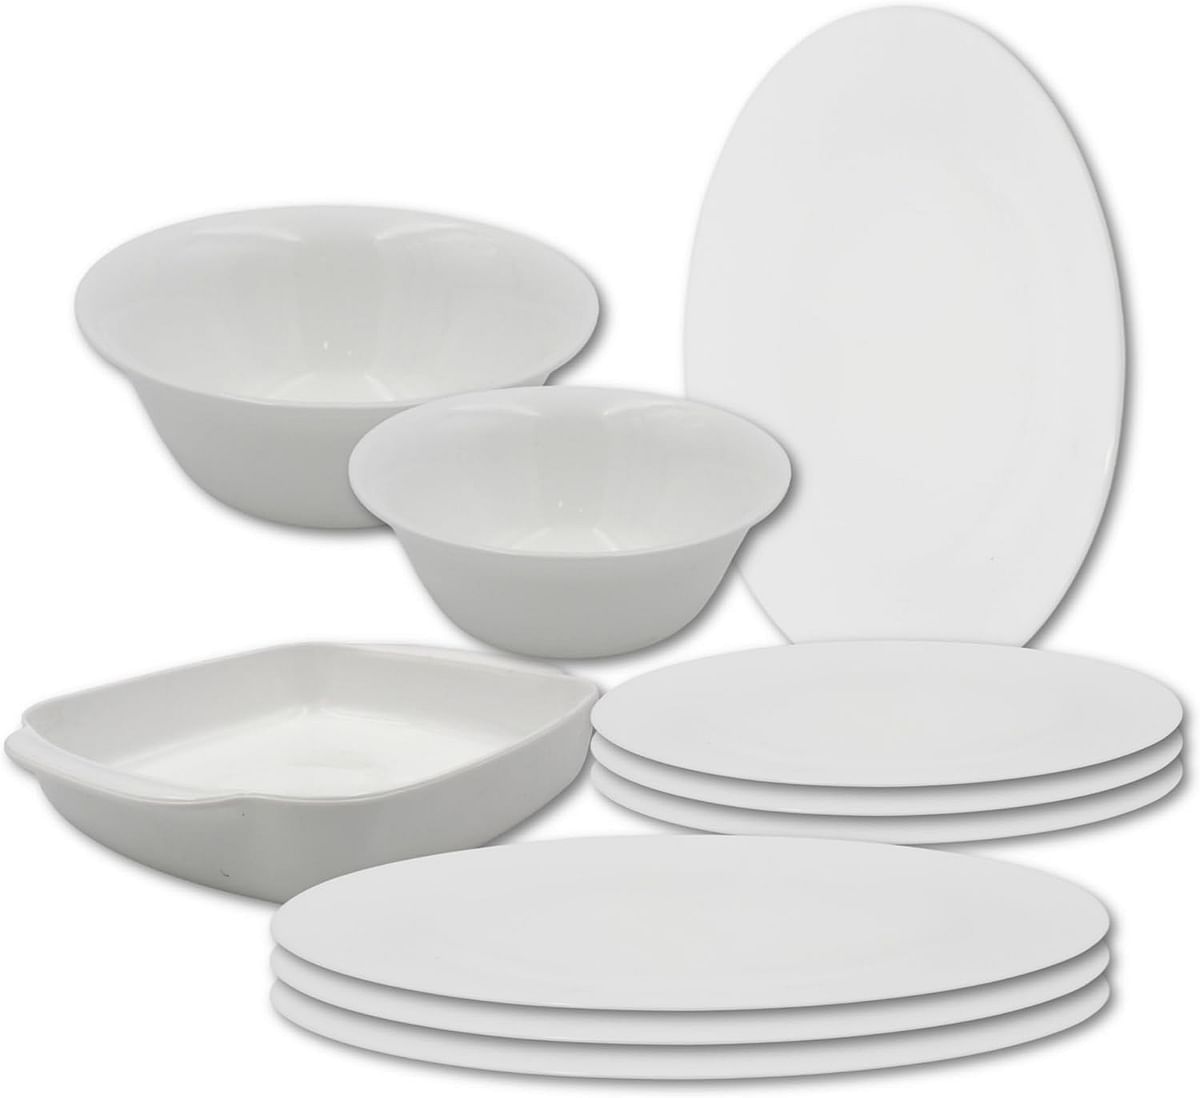 Danny home Opalware Portable 10 Pcs Dinnerware set Dinner plate, Soup plate, Salad bowl, Serving bowl, Serving Plate, Grill Tray Eco-friendly Safe to use, Dishwasher safe (Round)